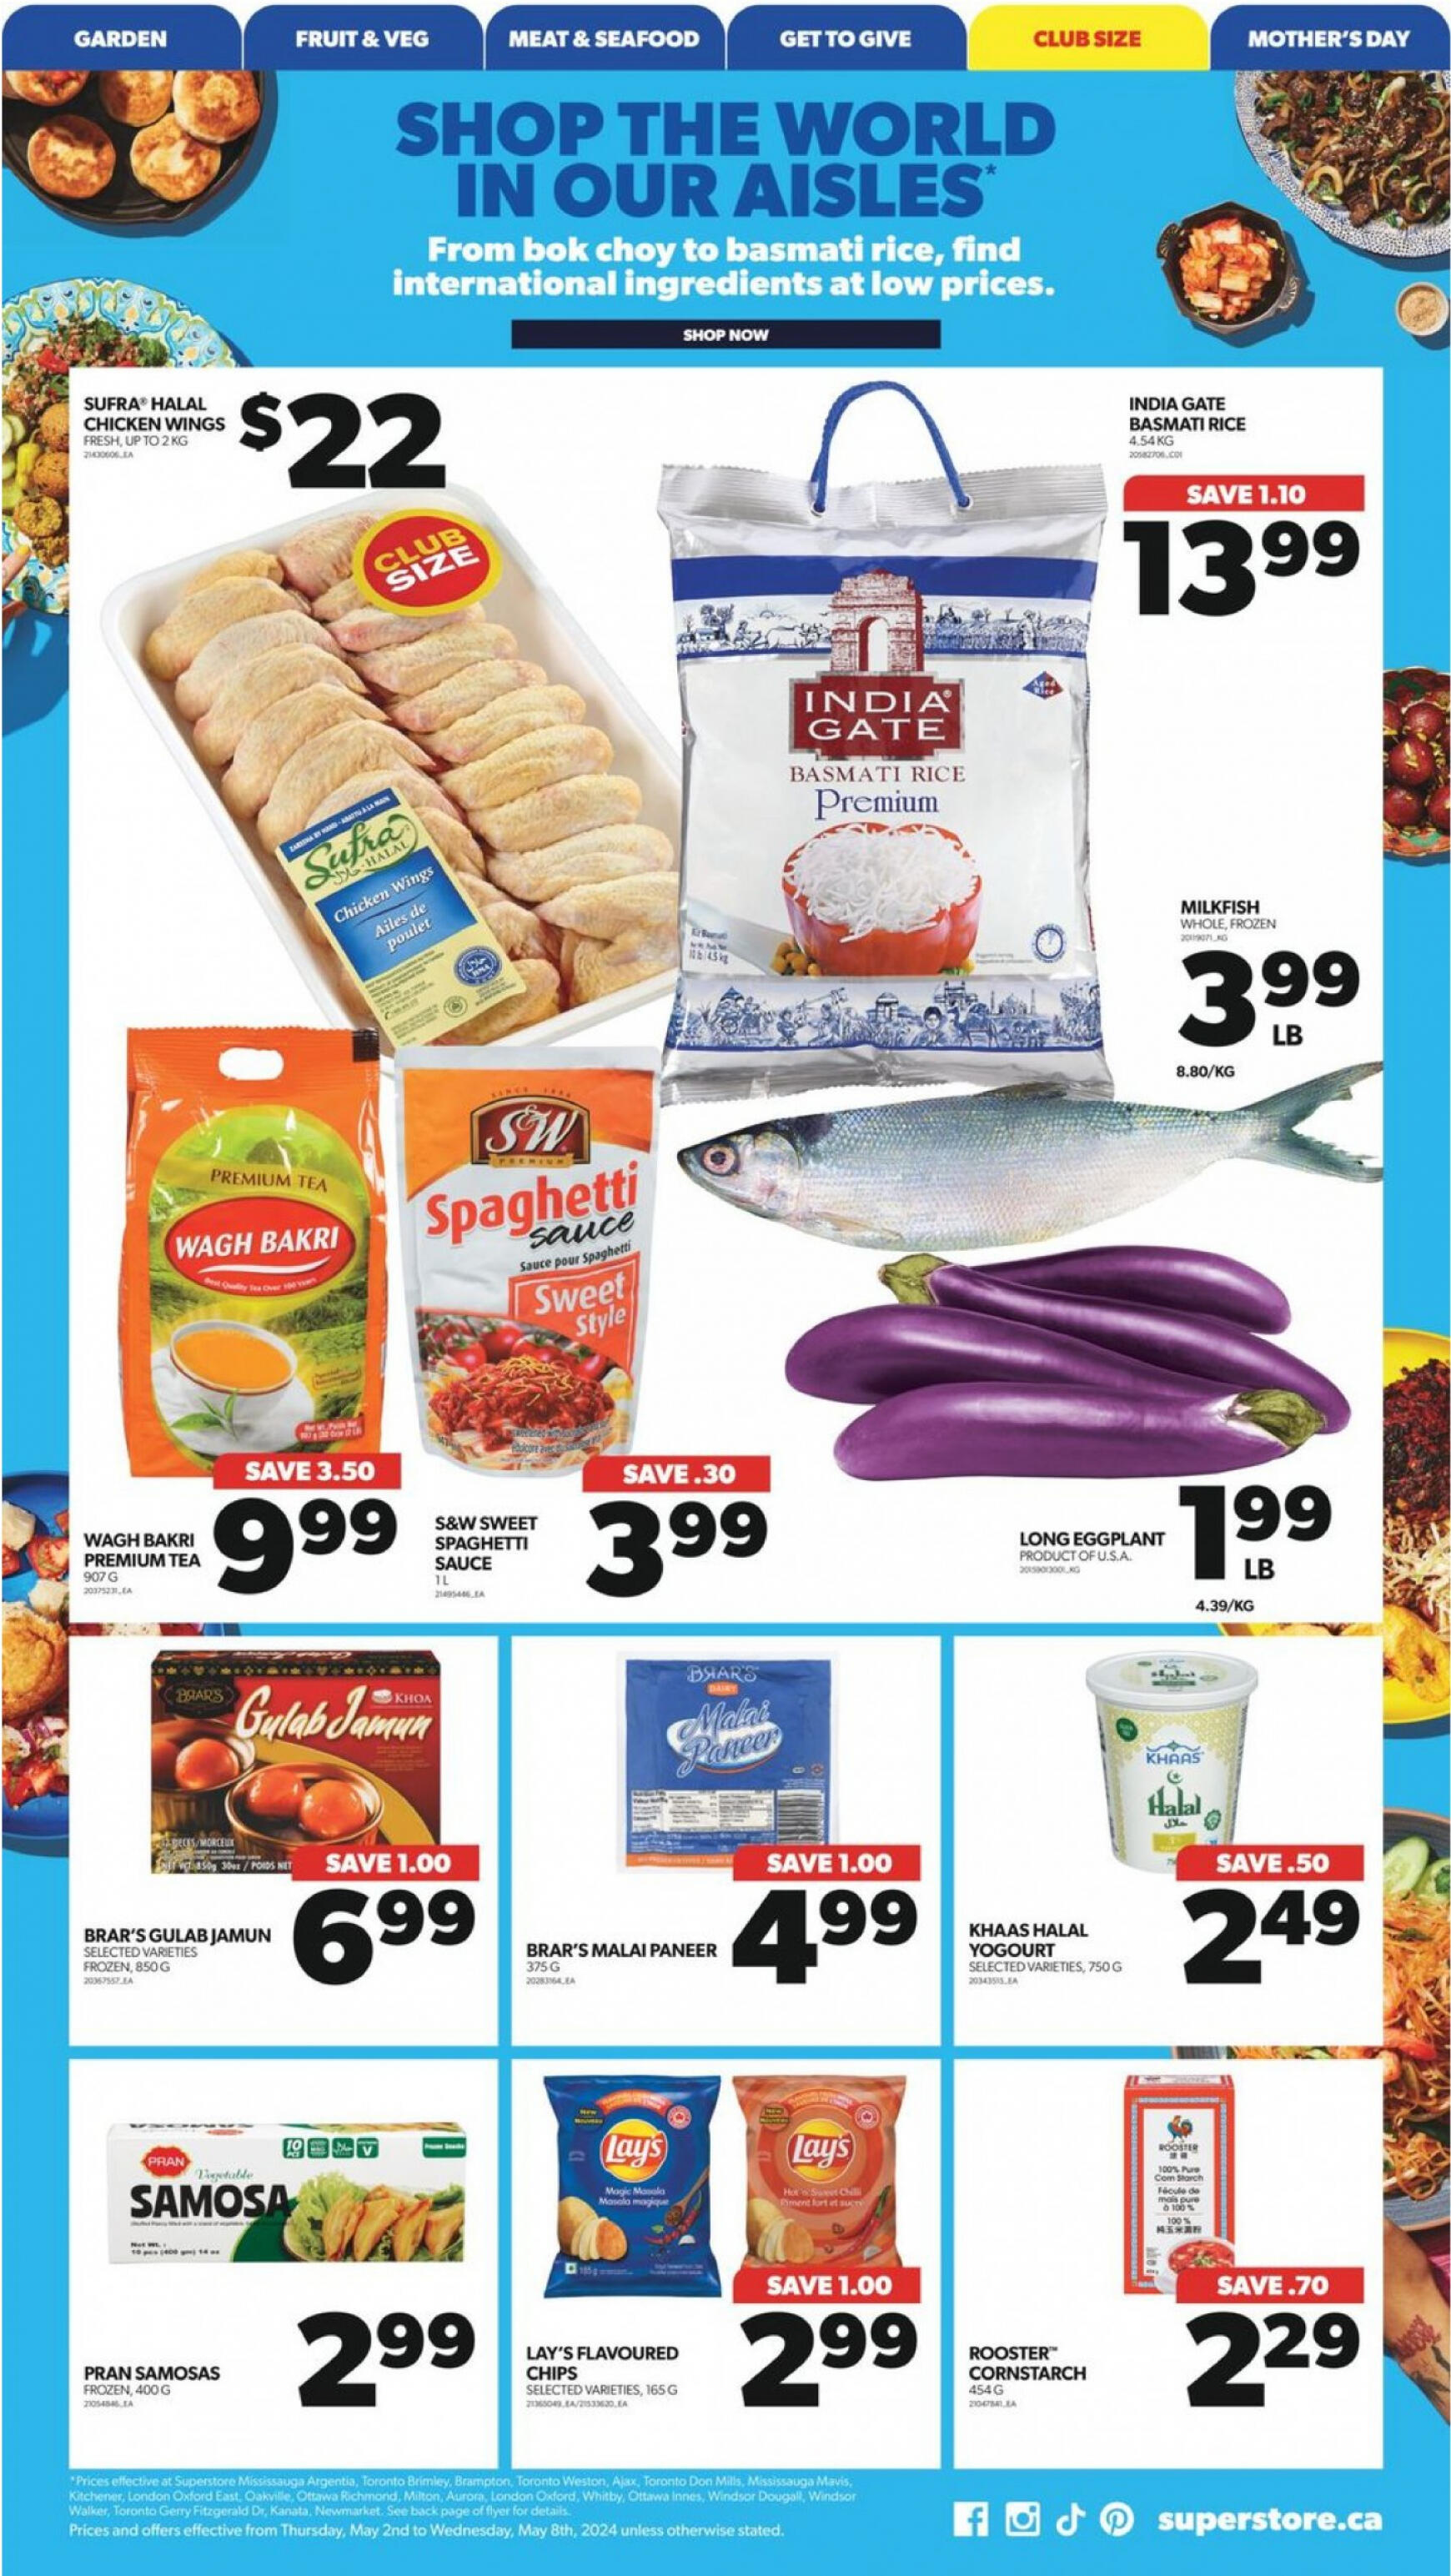 real-canadian-superstore - Real Canadian Superstore flyer current 01.05. - 31.05. - page: 38